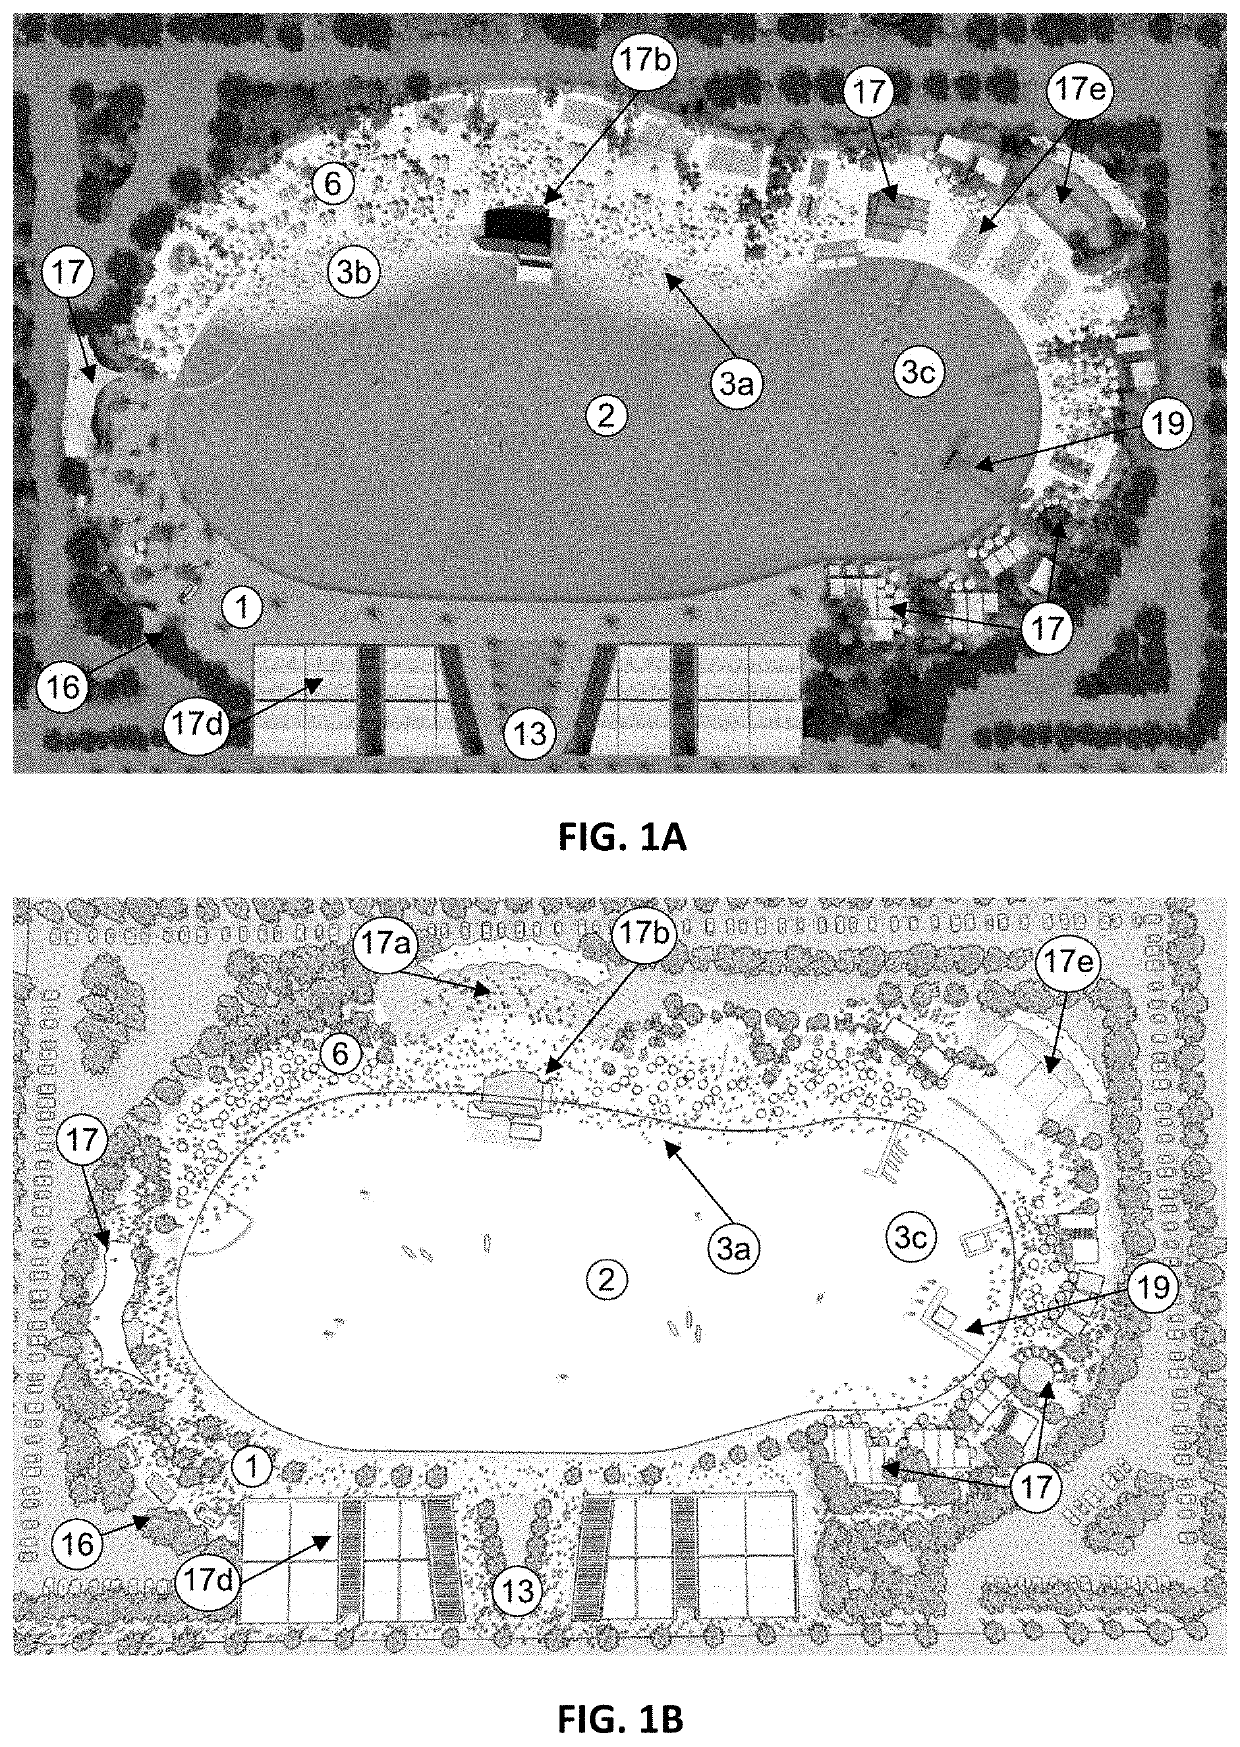 Publicly accessible urban beach entertainment complex with a centerpiece man-made tropical-style lagoon and method for providing efficient utilization of limited use land